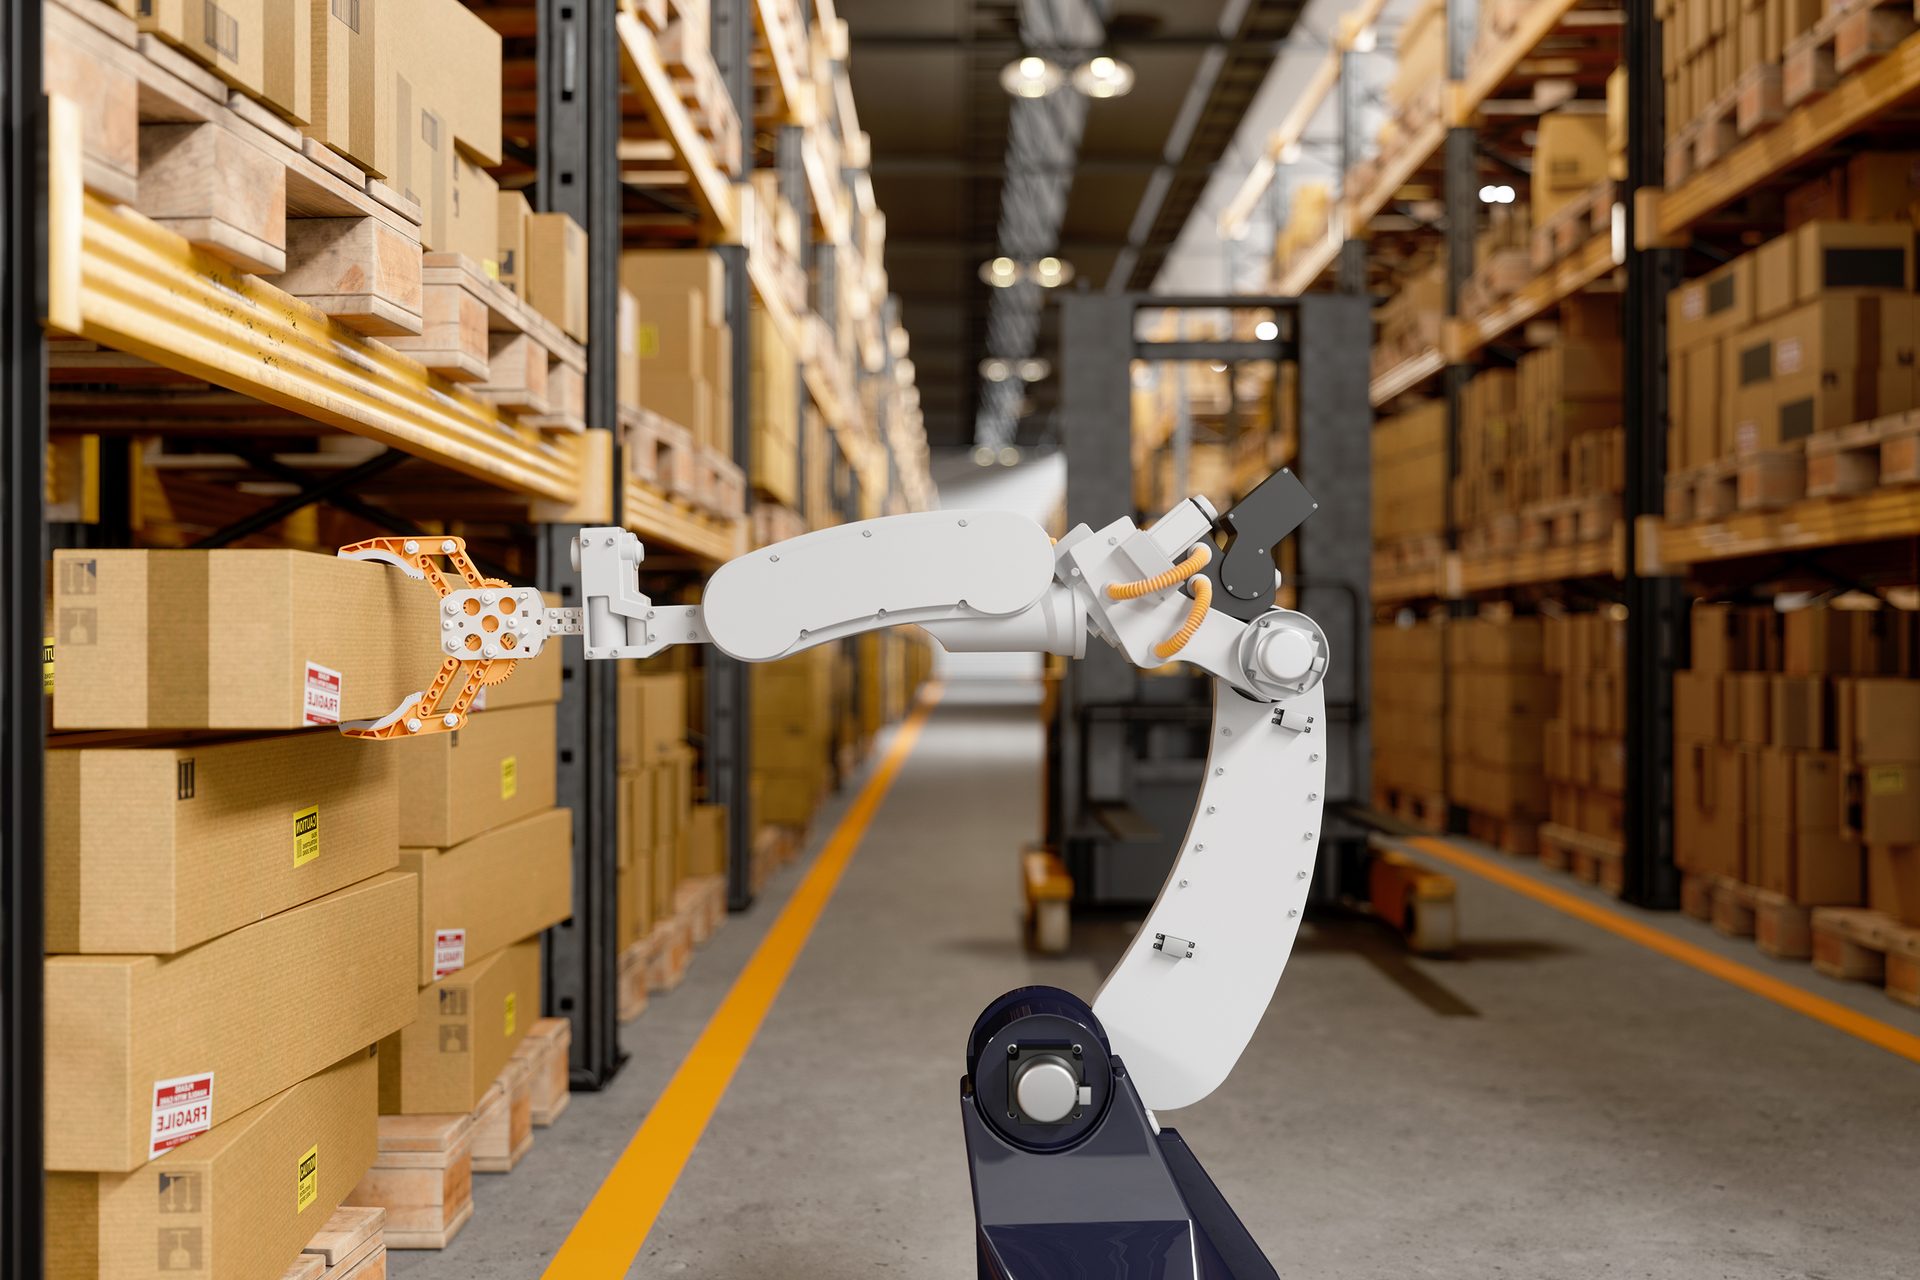 Robotic arm picking up a box in a warehouse